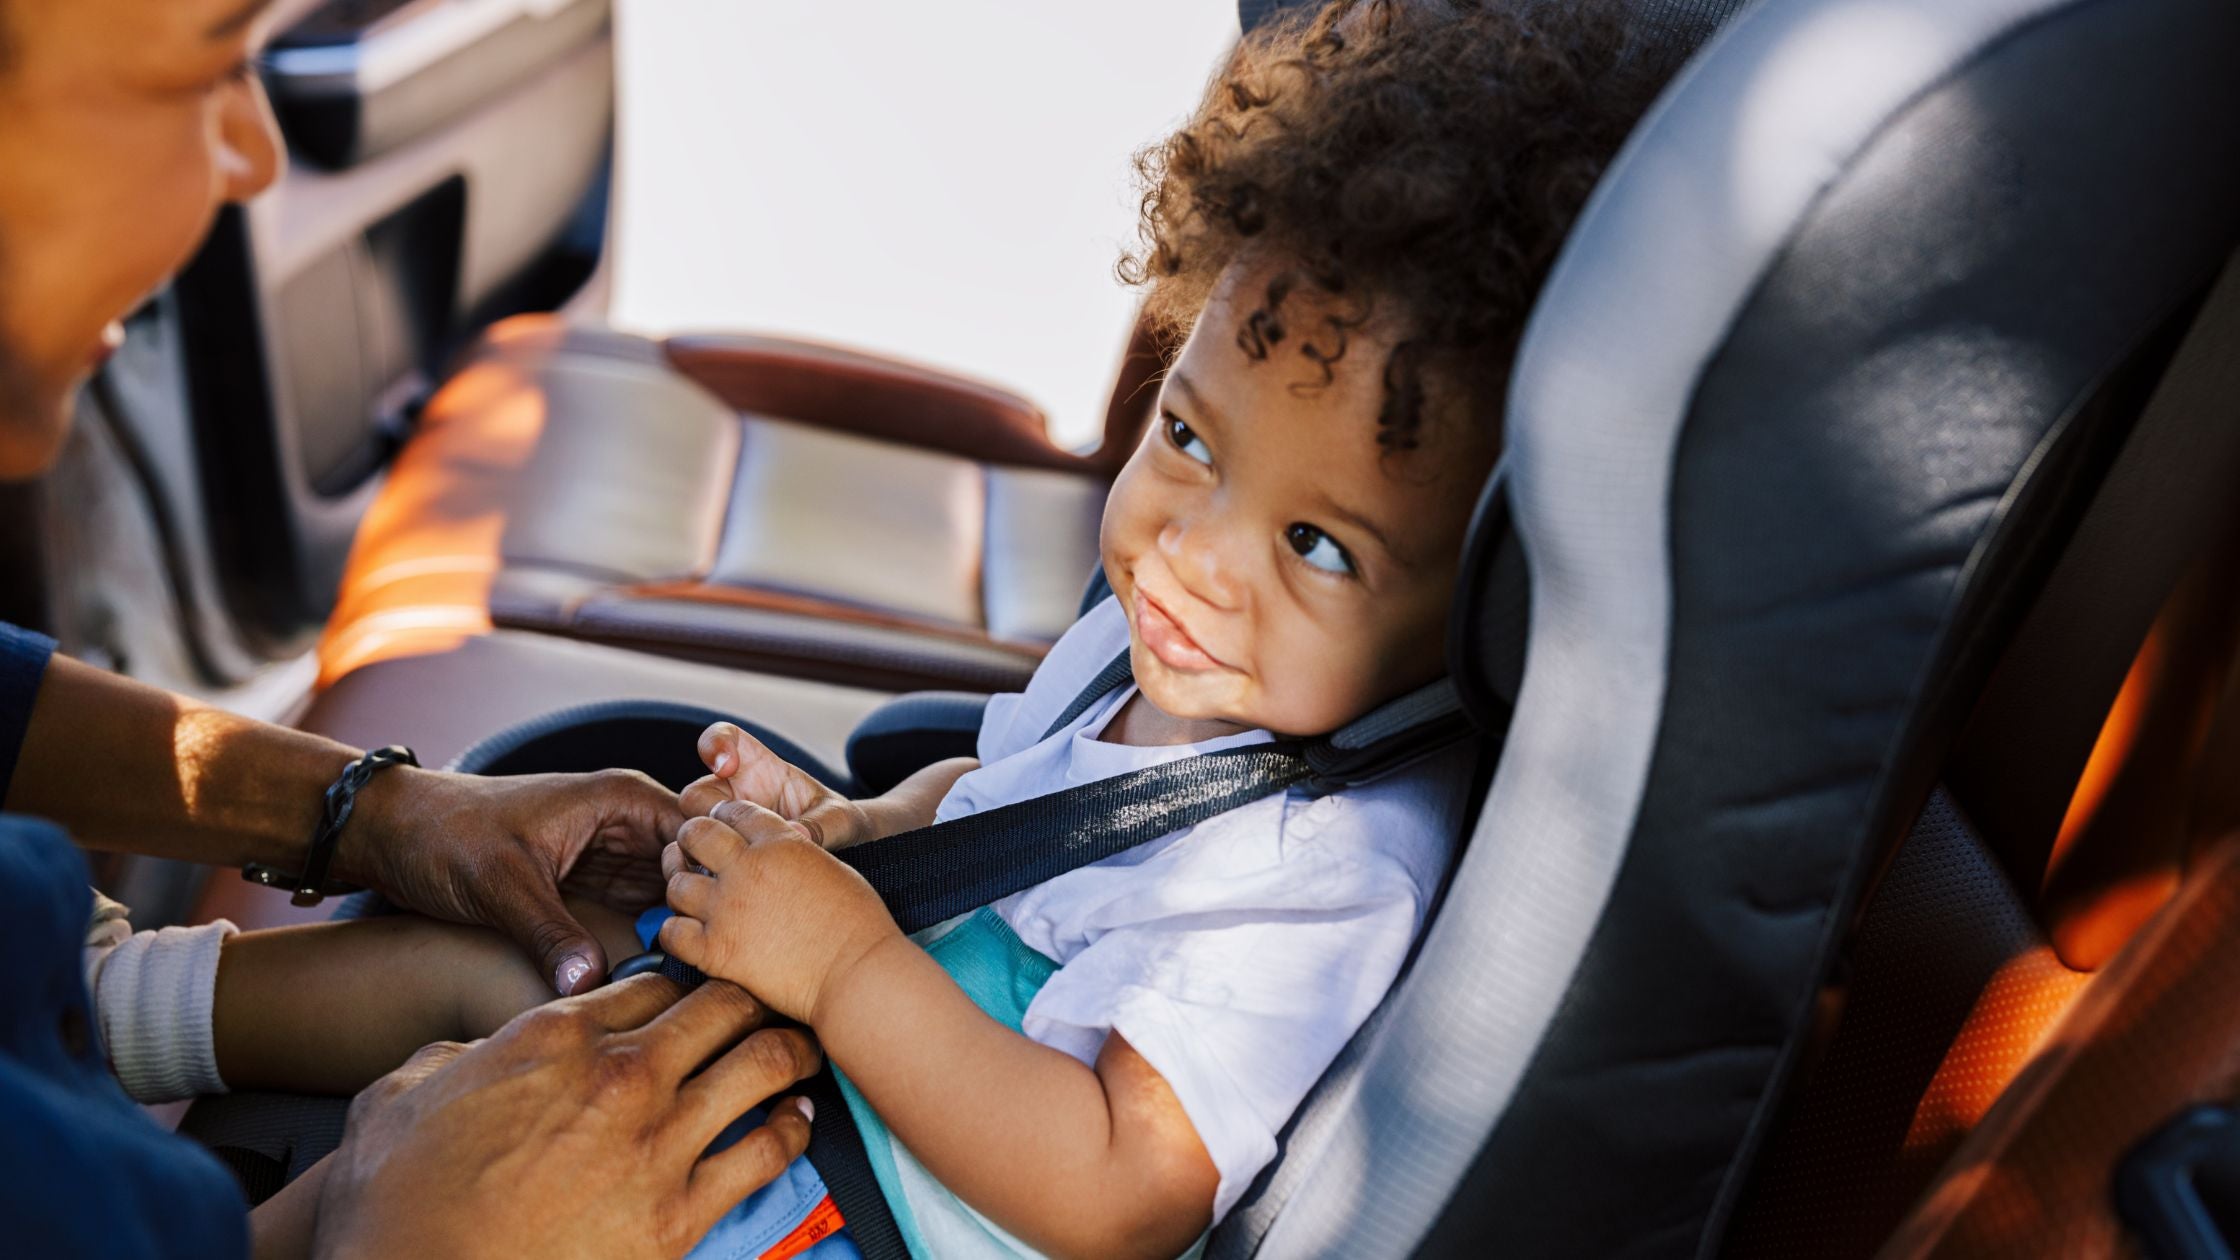 Top Tips for Travelling in the Car When Your Child Has Eczema